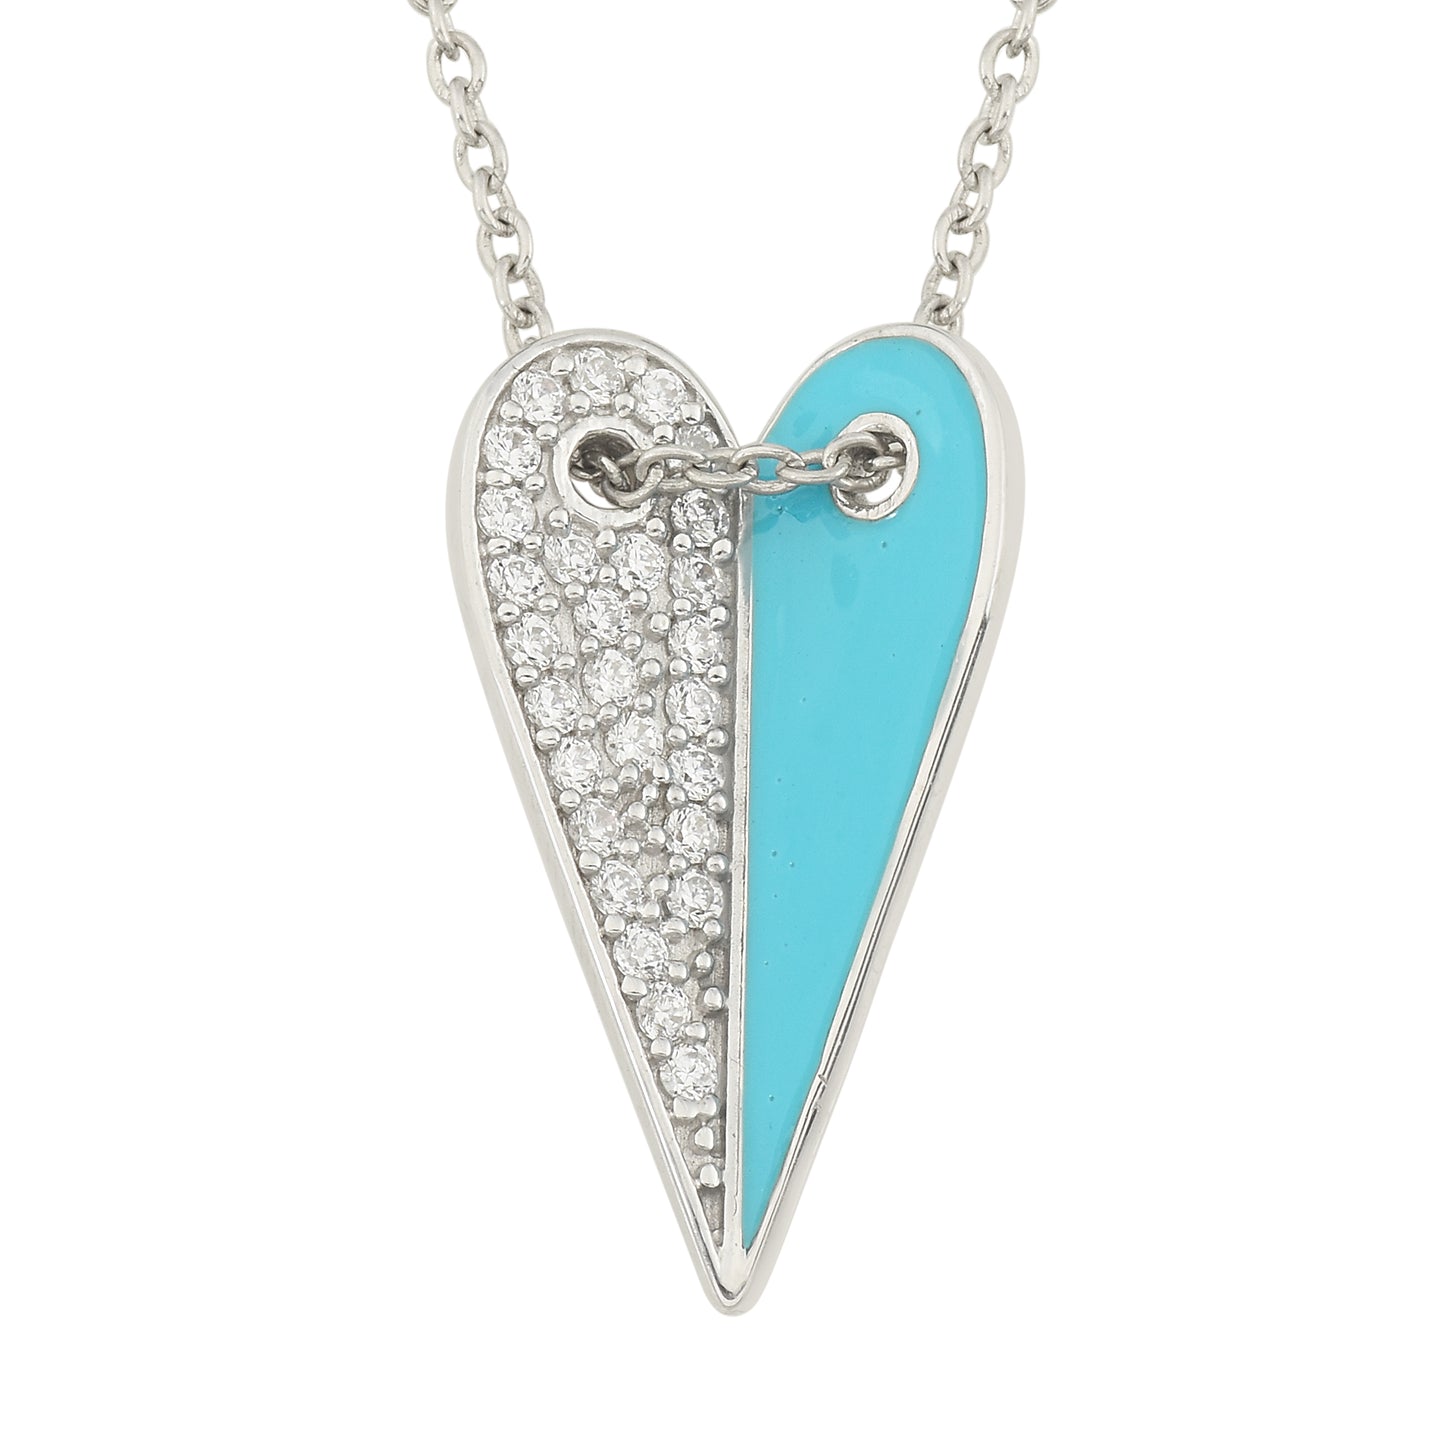 Cheerful Blue Heart Necklace